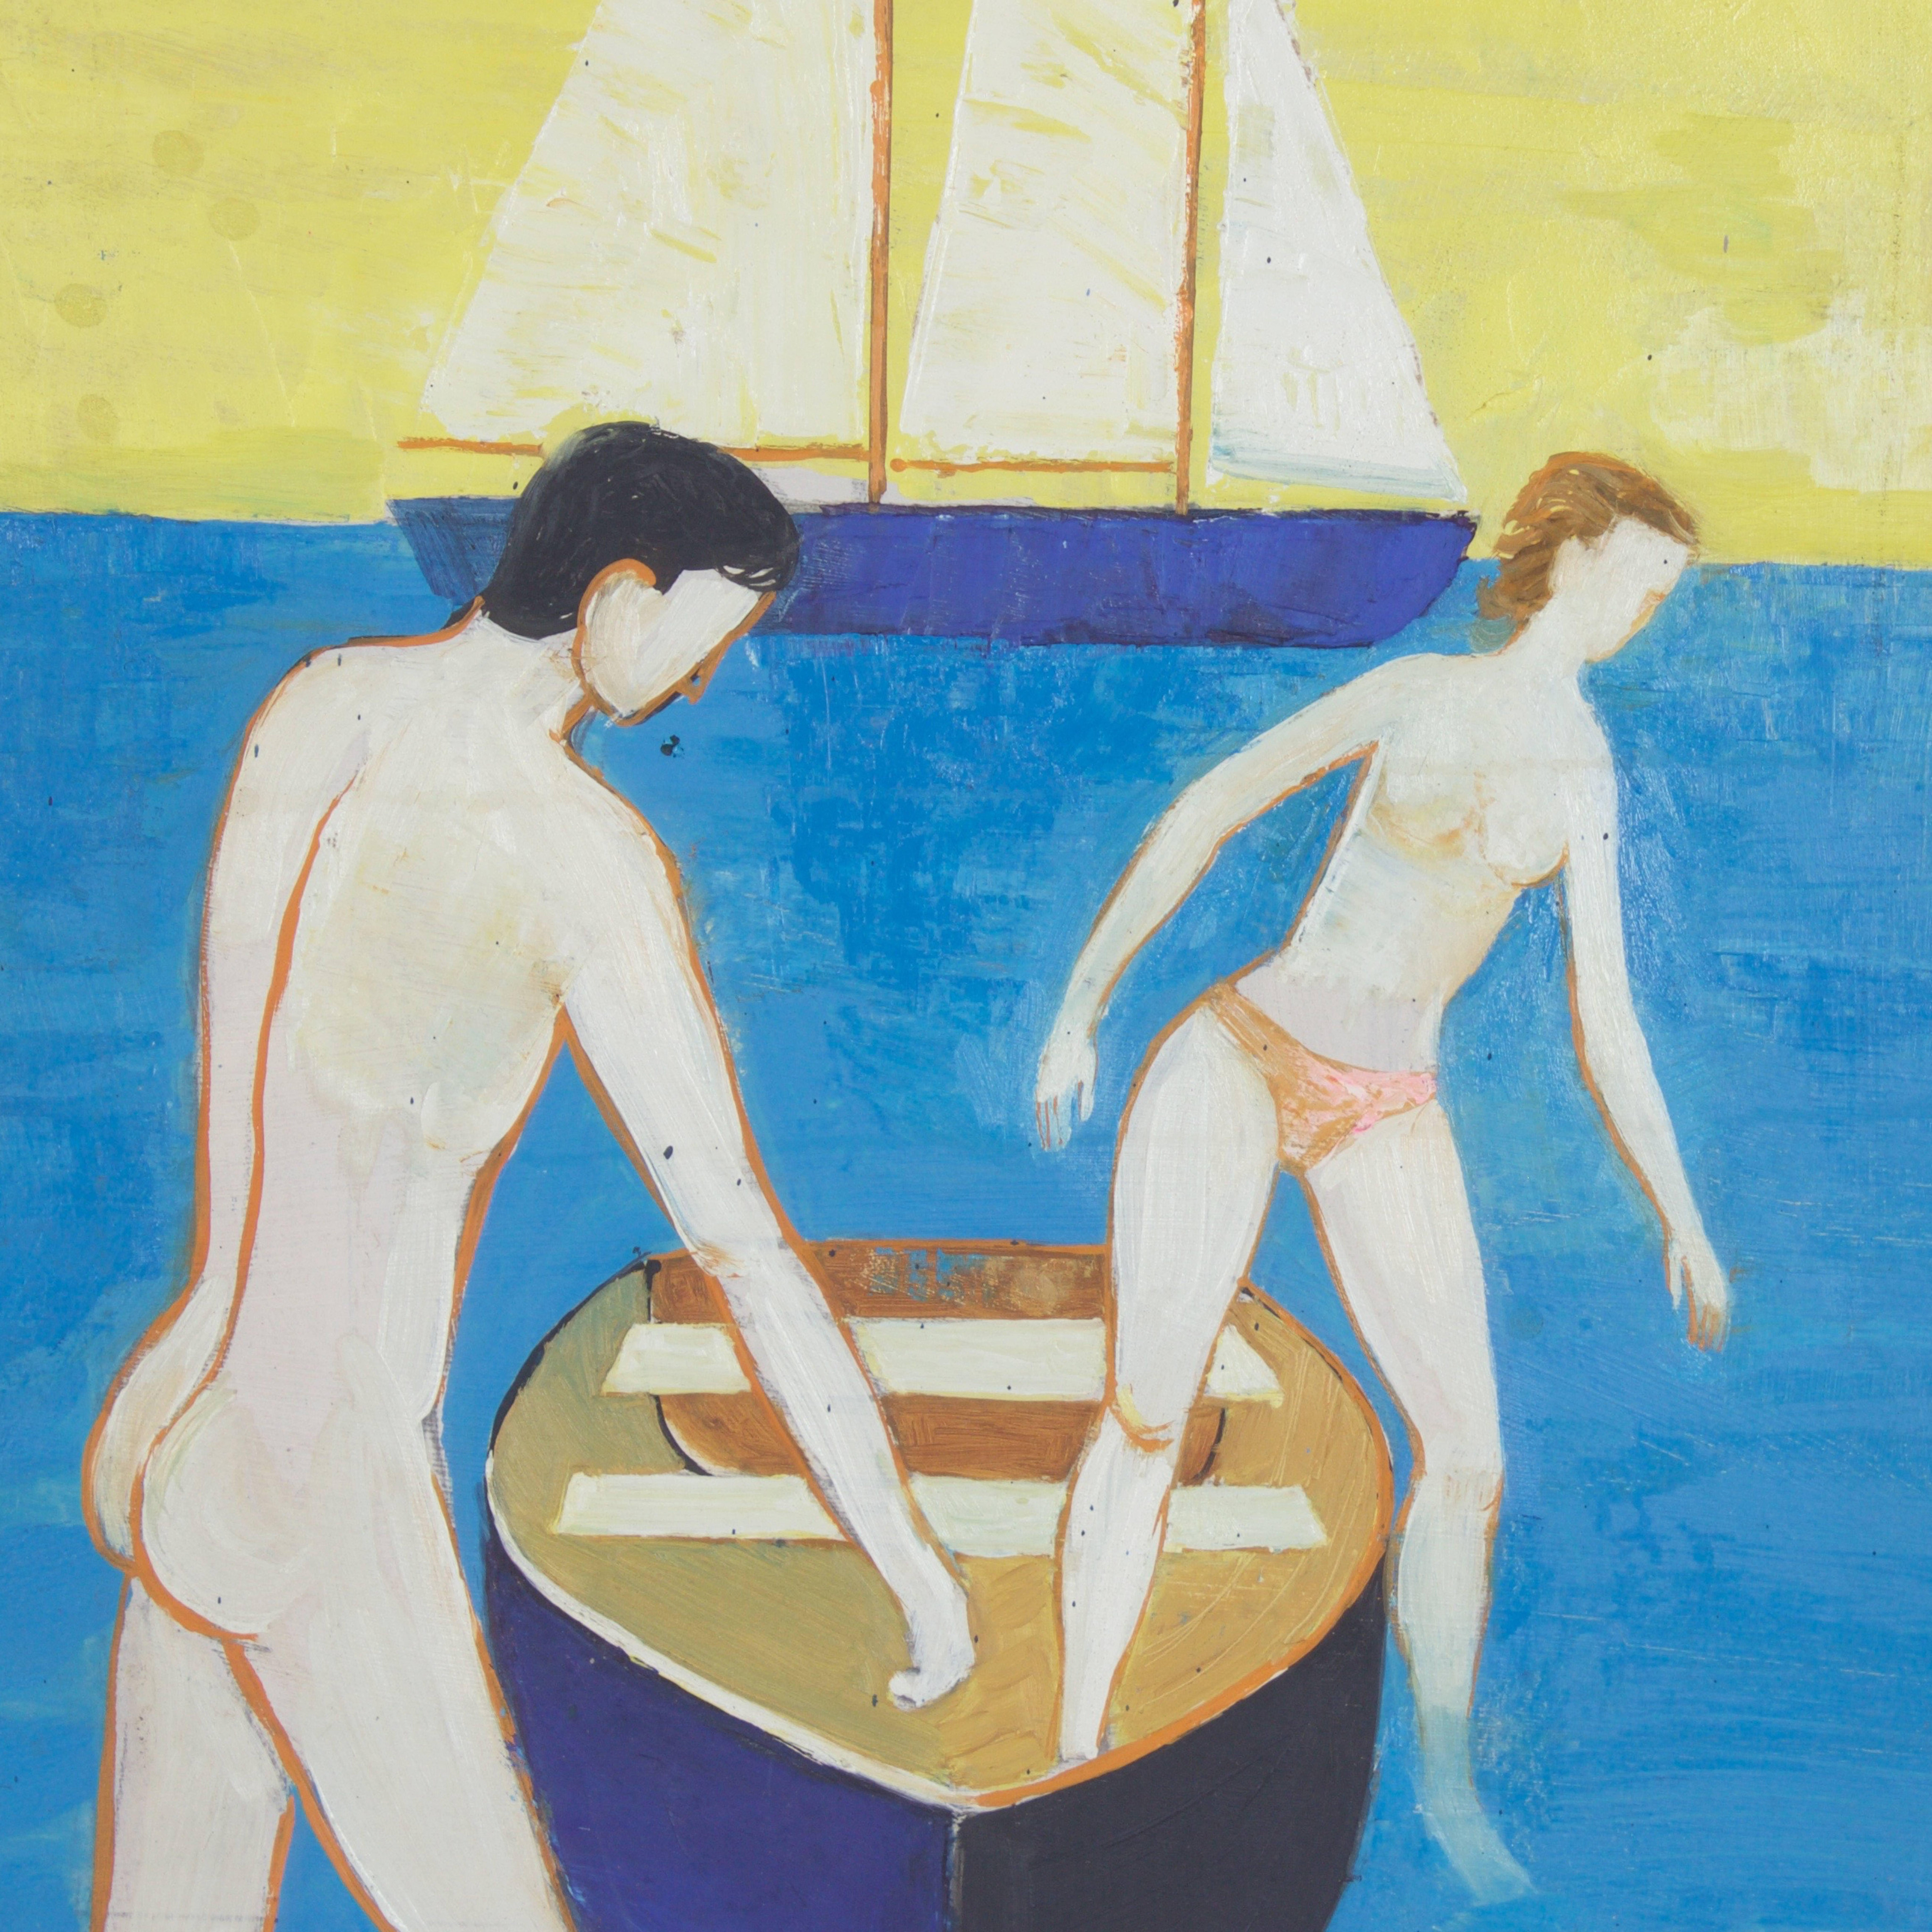 Here is a simple, warm, and folky Mid-Century oil painting on board of two free spirited figures enjoying the summer heat, sky, water, and a boat on the beach. From a collection of Robert Blanchard paintings recently acquired in our inventory. 

.